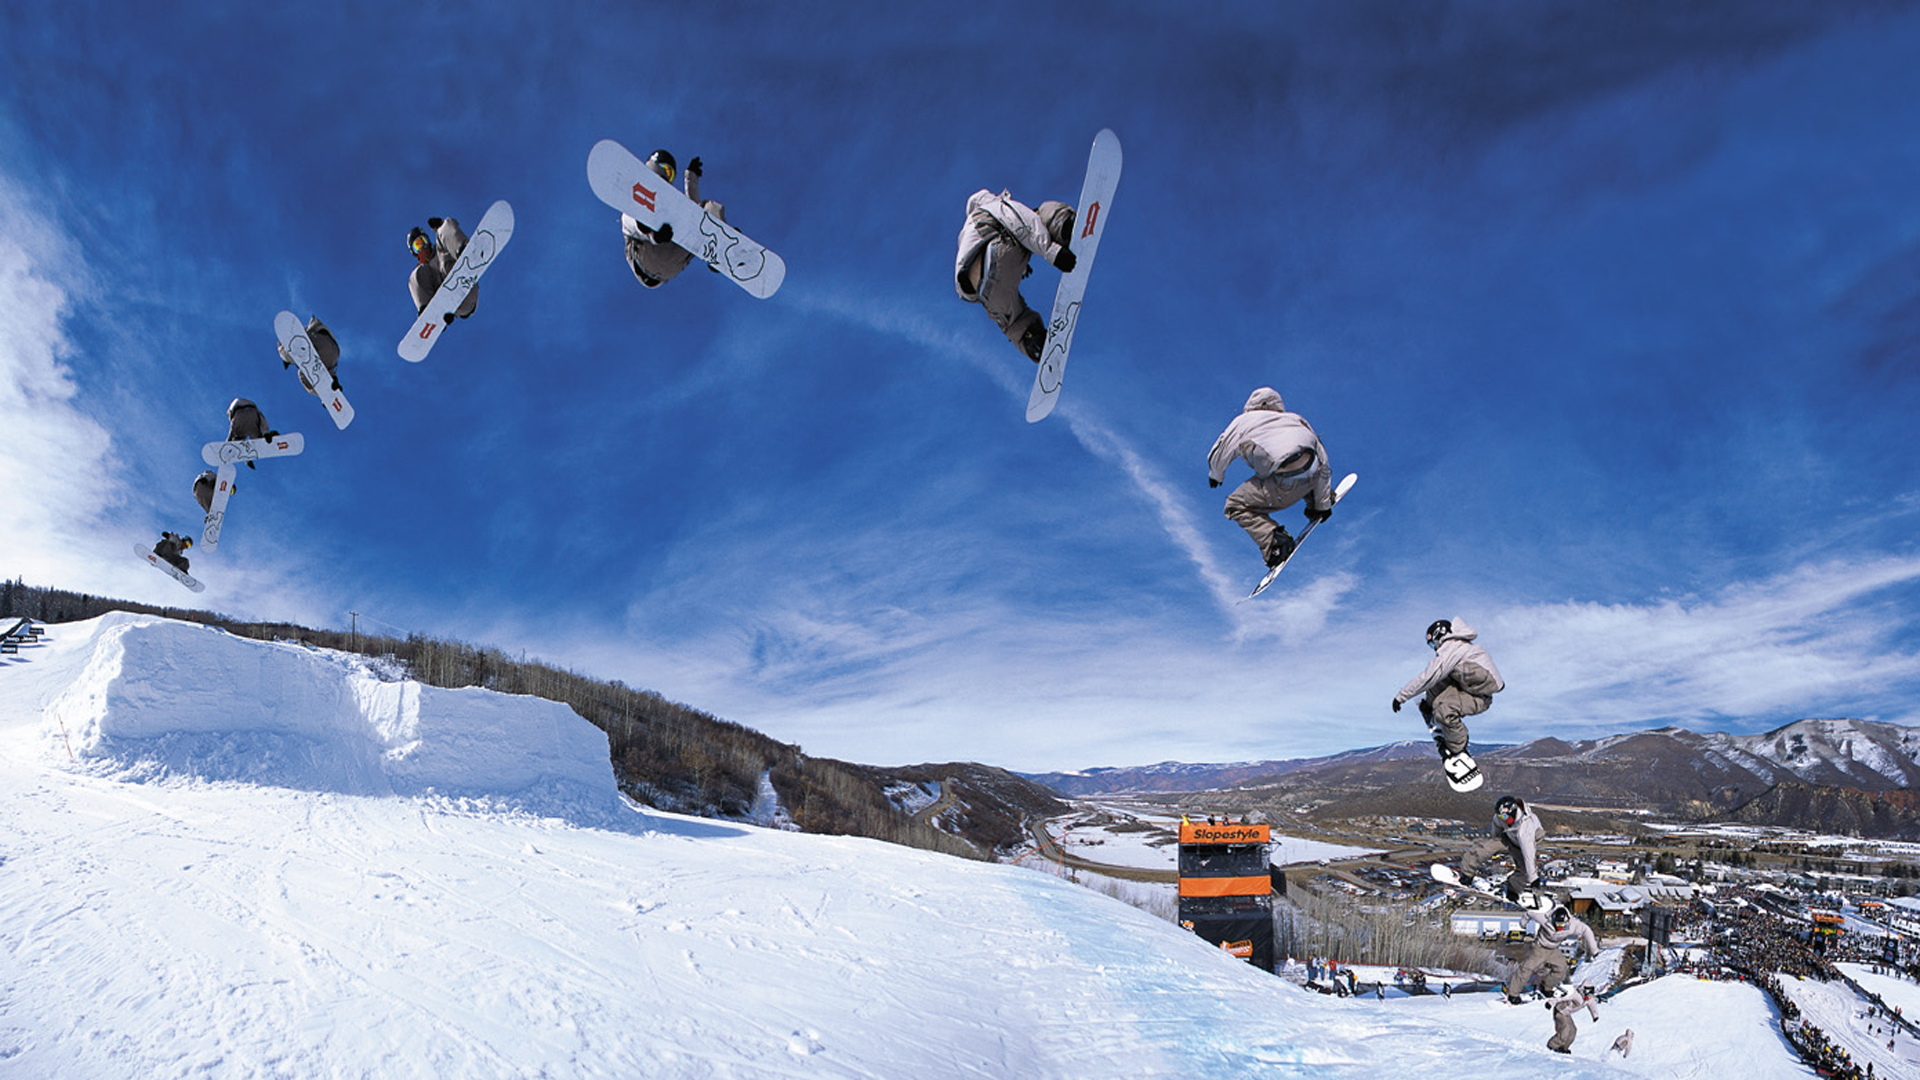 snowboarding, sports images